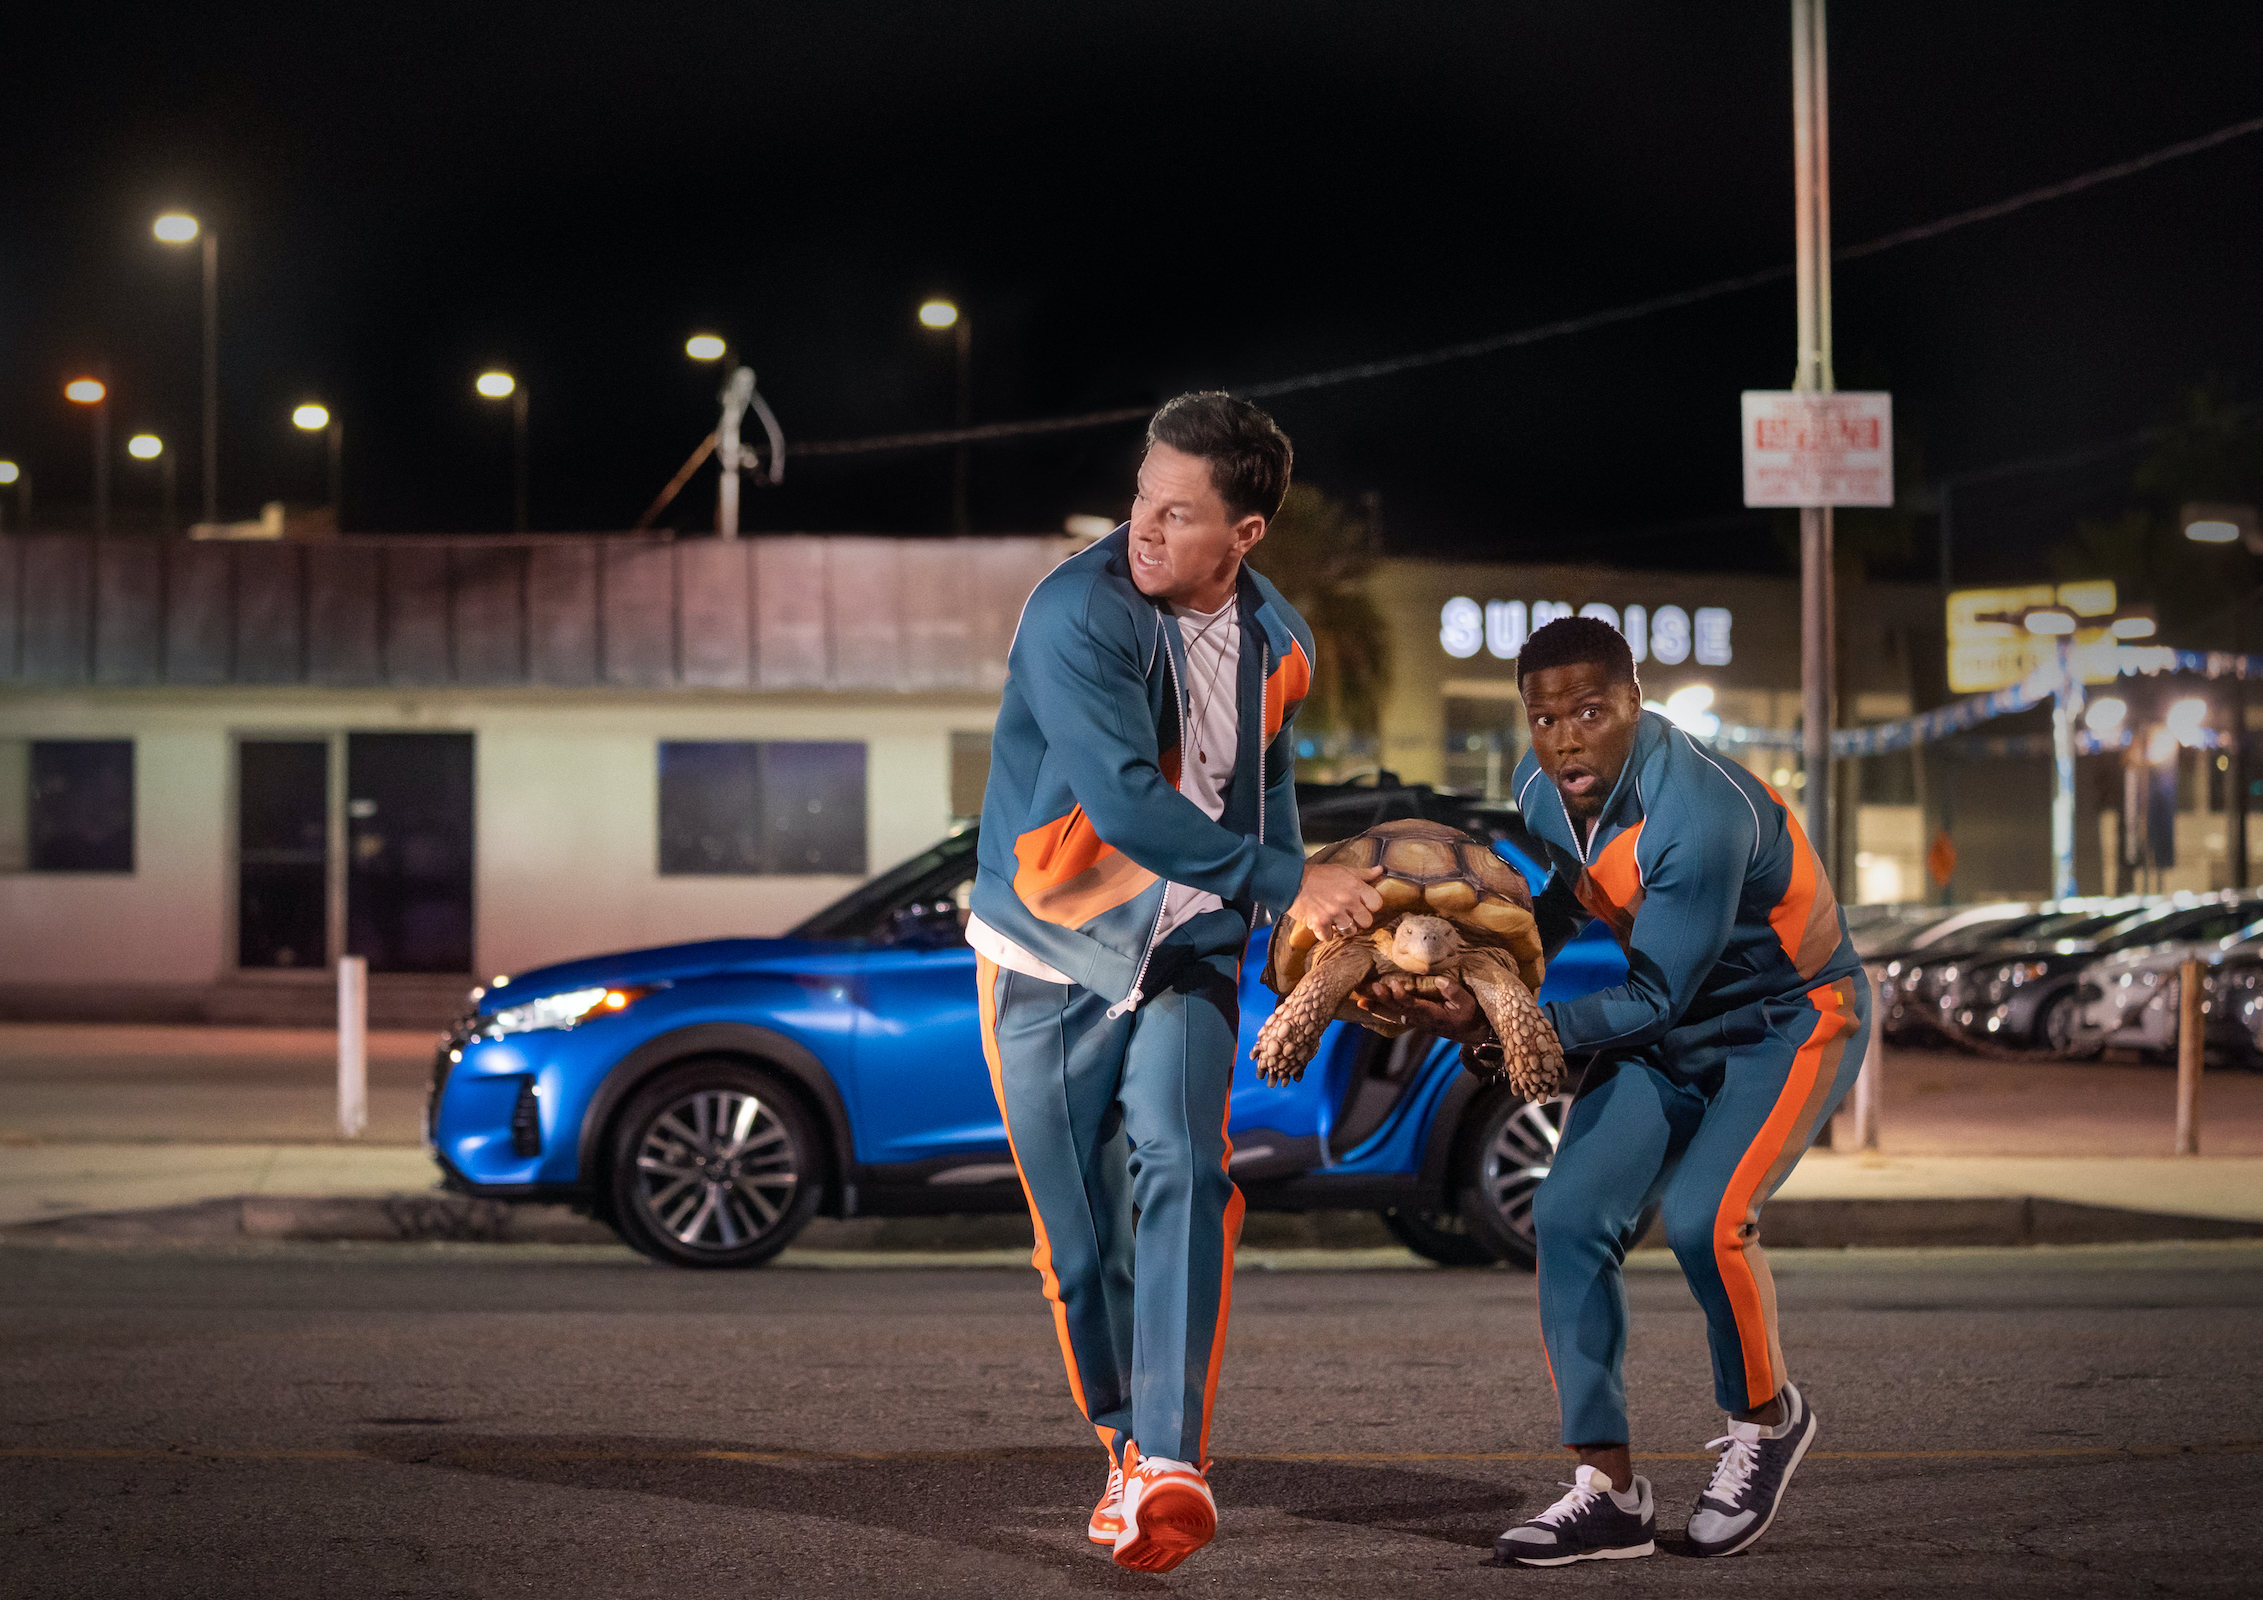 Mark Wahlberg as Huck, Kevin Hart as Sonny in Me Time (SAEED ADYANI—NETFLIX)